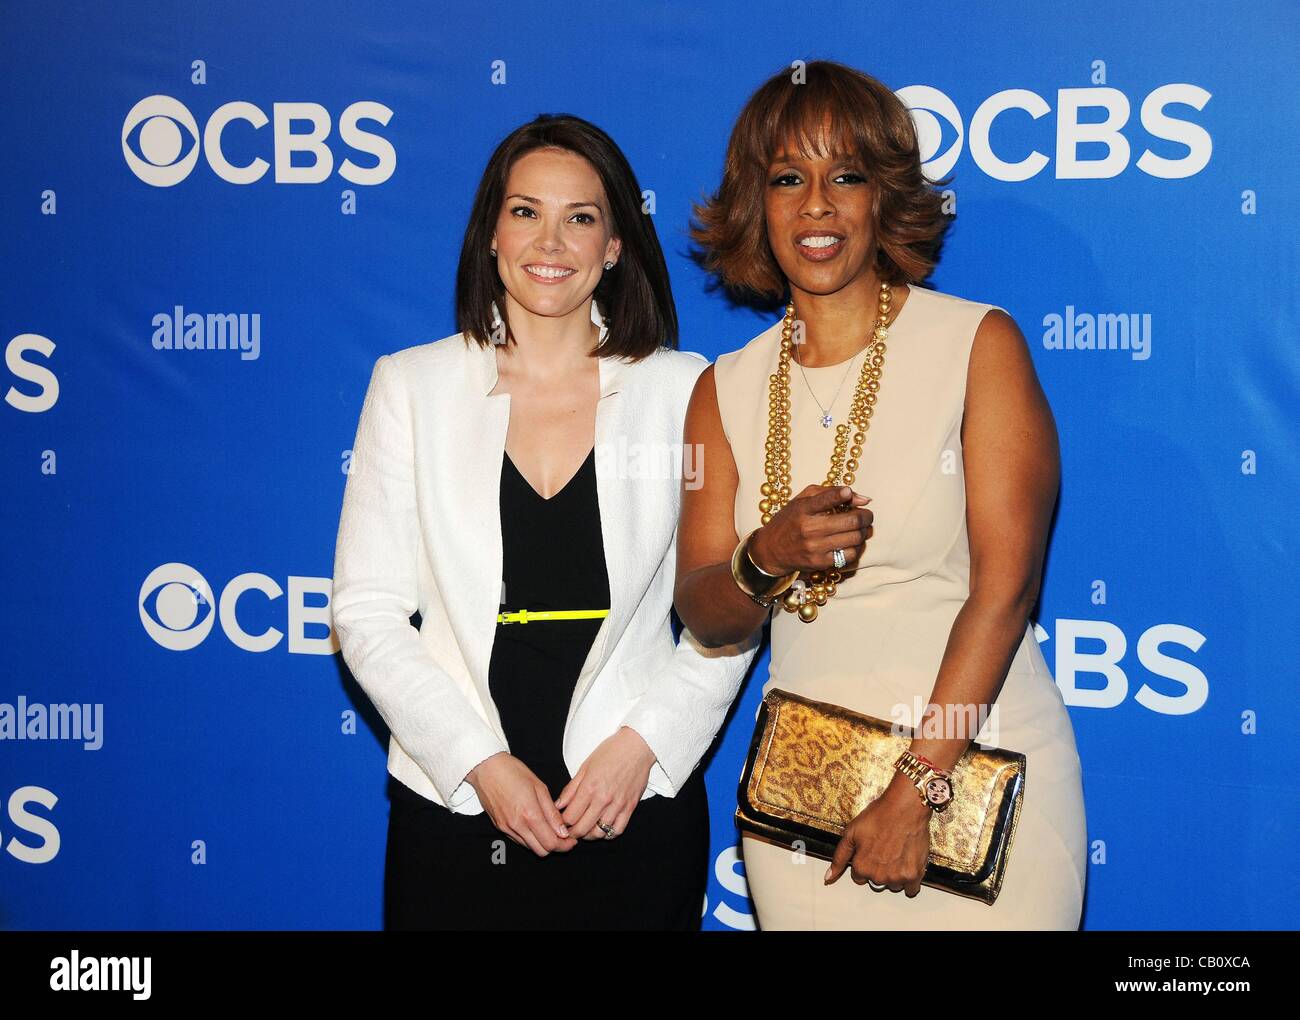 Erica Hill, Gayle King at arrivals for CBS Network Upfronts Presentation 2012, Lincoln Center, New York, NY May 16, 2012. Photo By: Desiree Navarro/Everett Collection Stock Photo